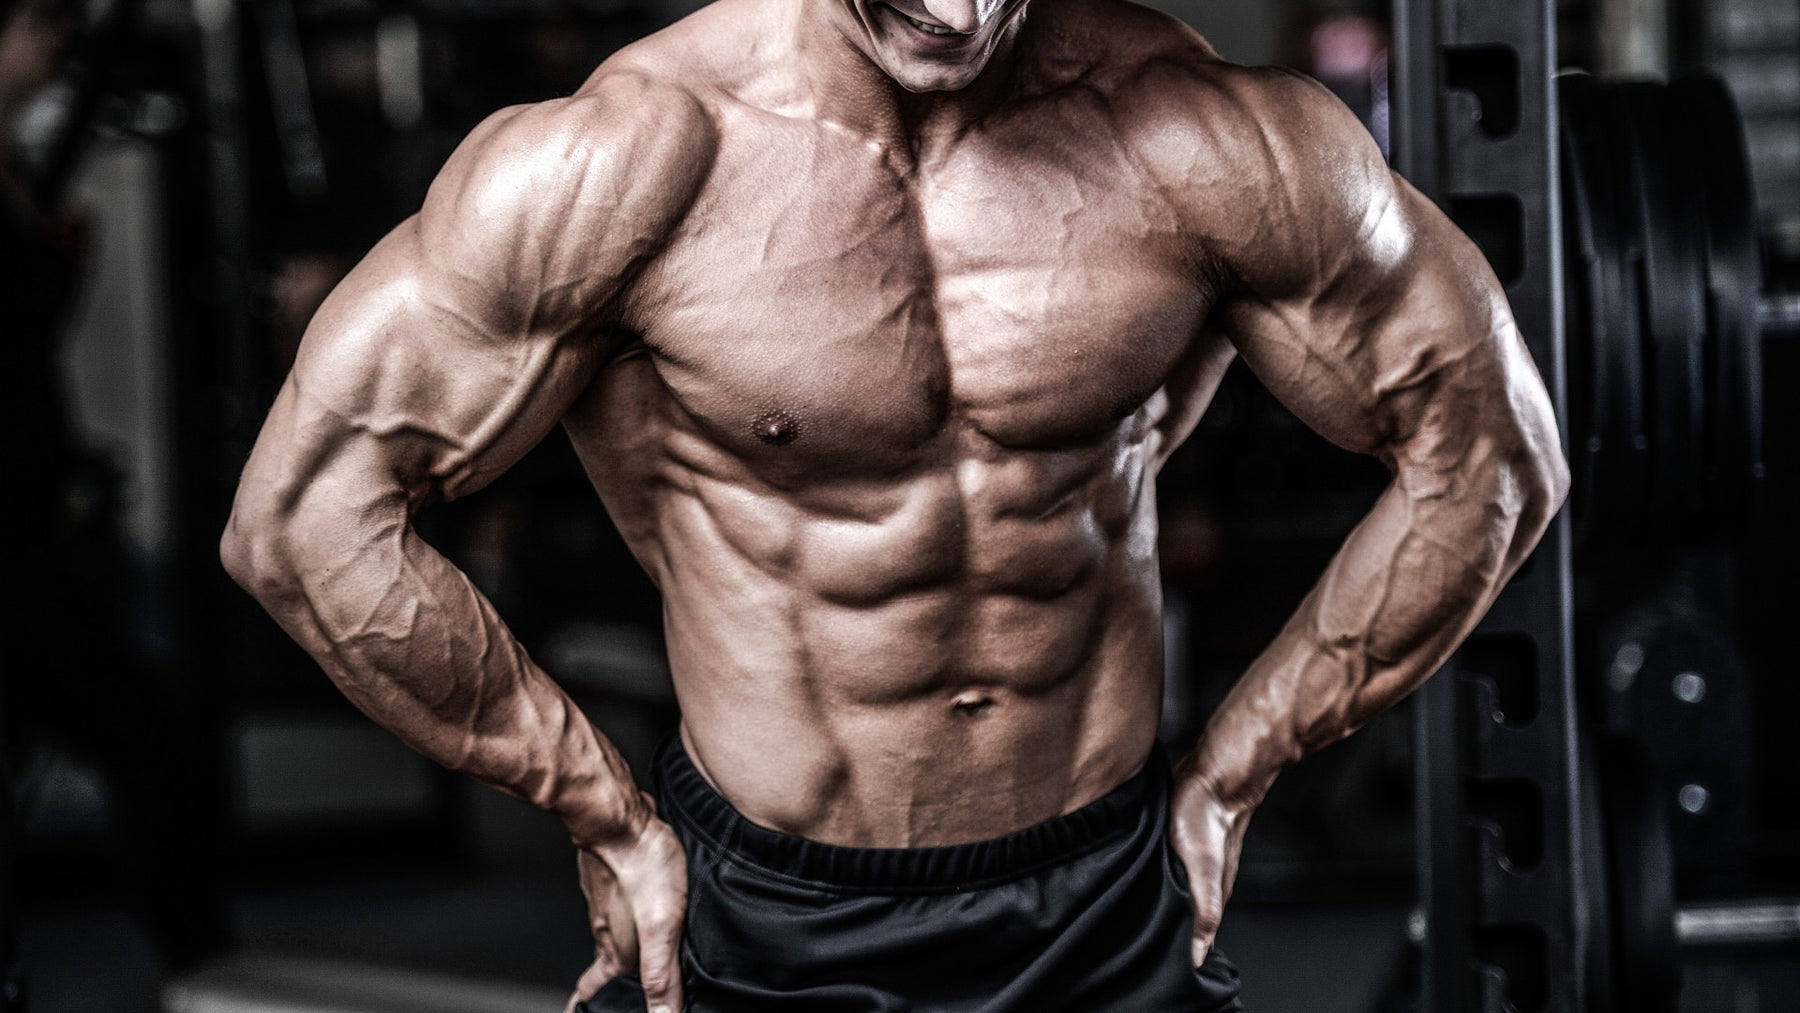 L Citrulline - Comprehensive Guide to Benefits and Dosage